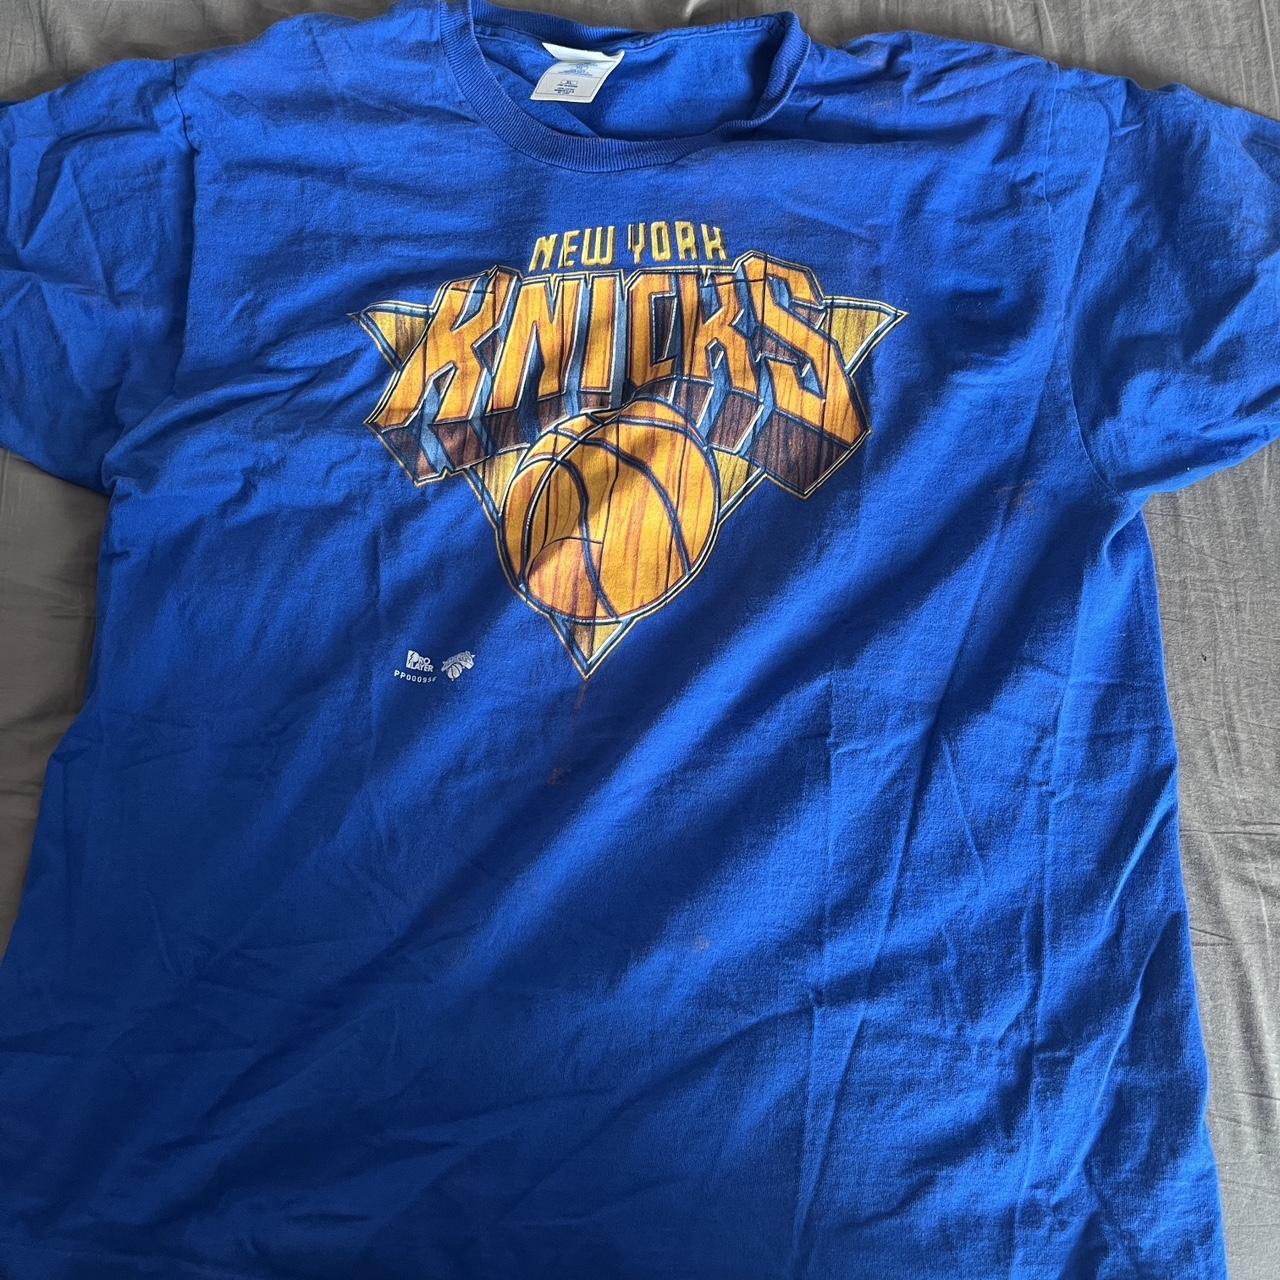 Vintage NYK t shirt, perfect condition - Depop